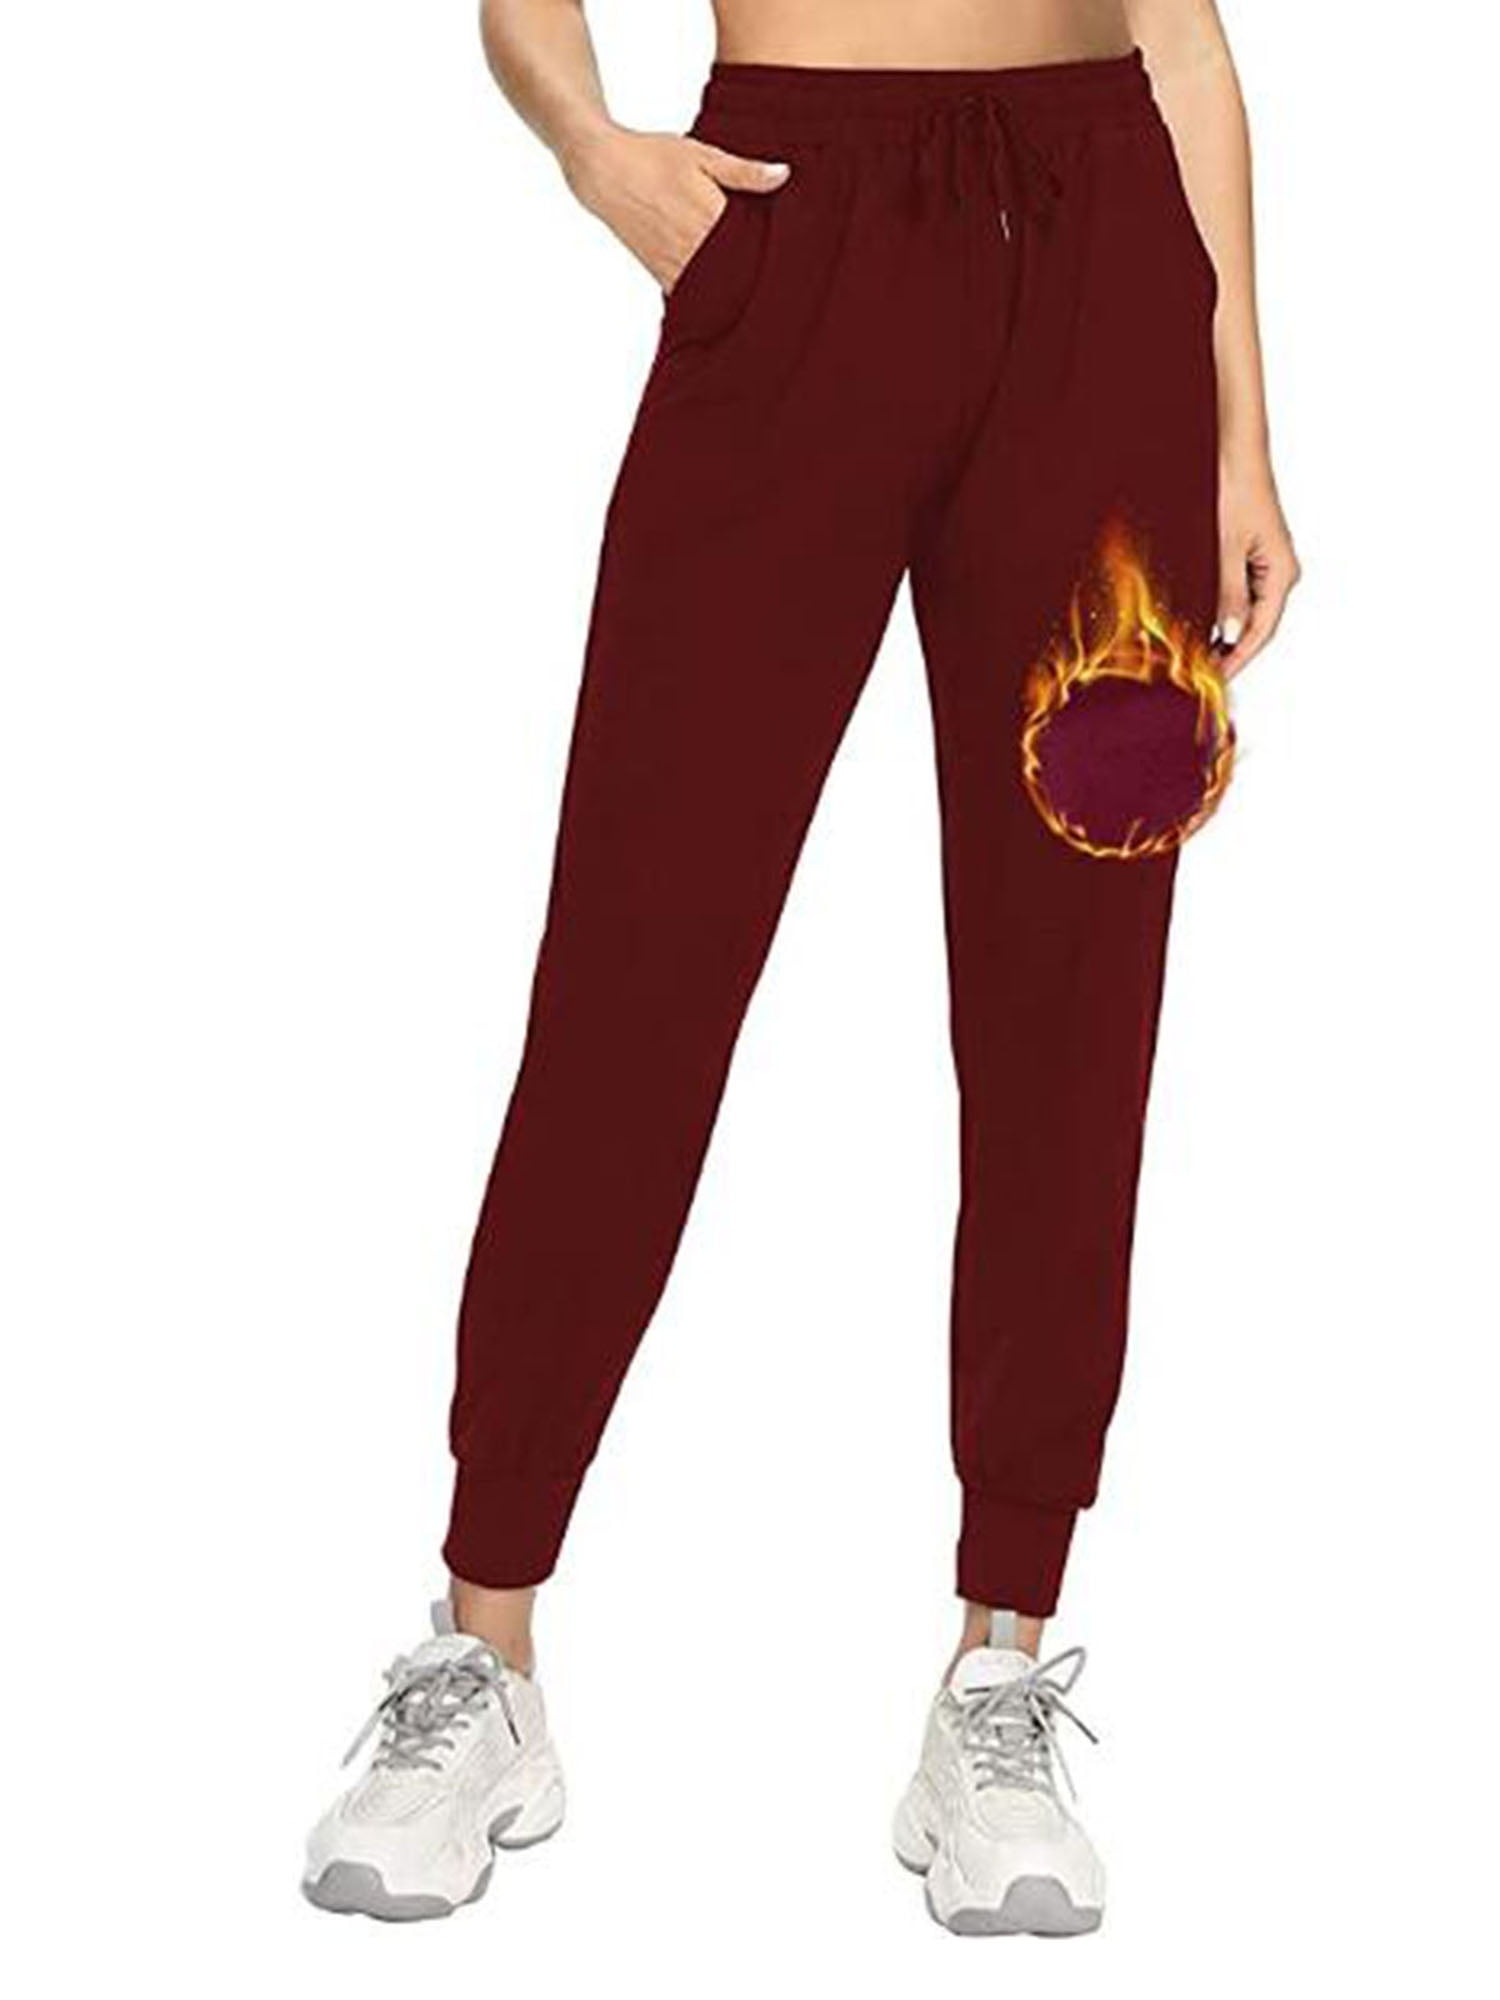 Canrulo Womens Winter Sweatpants Warm Fleece Lined Sports Pants Running  Workout Trousers Red Wine S 